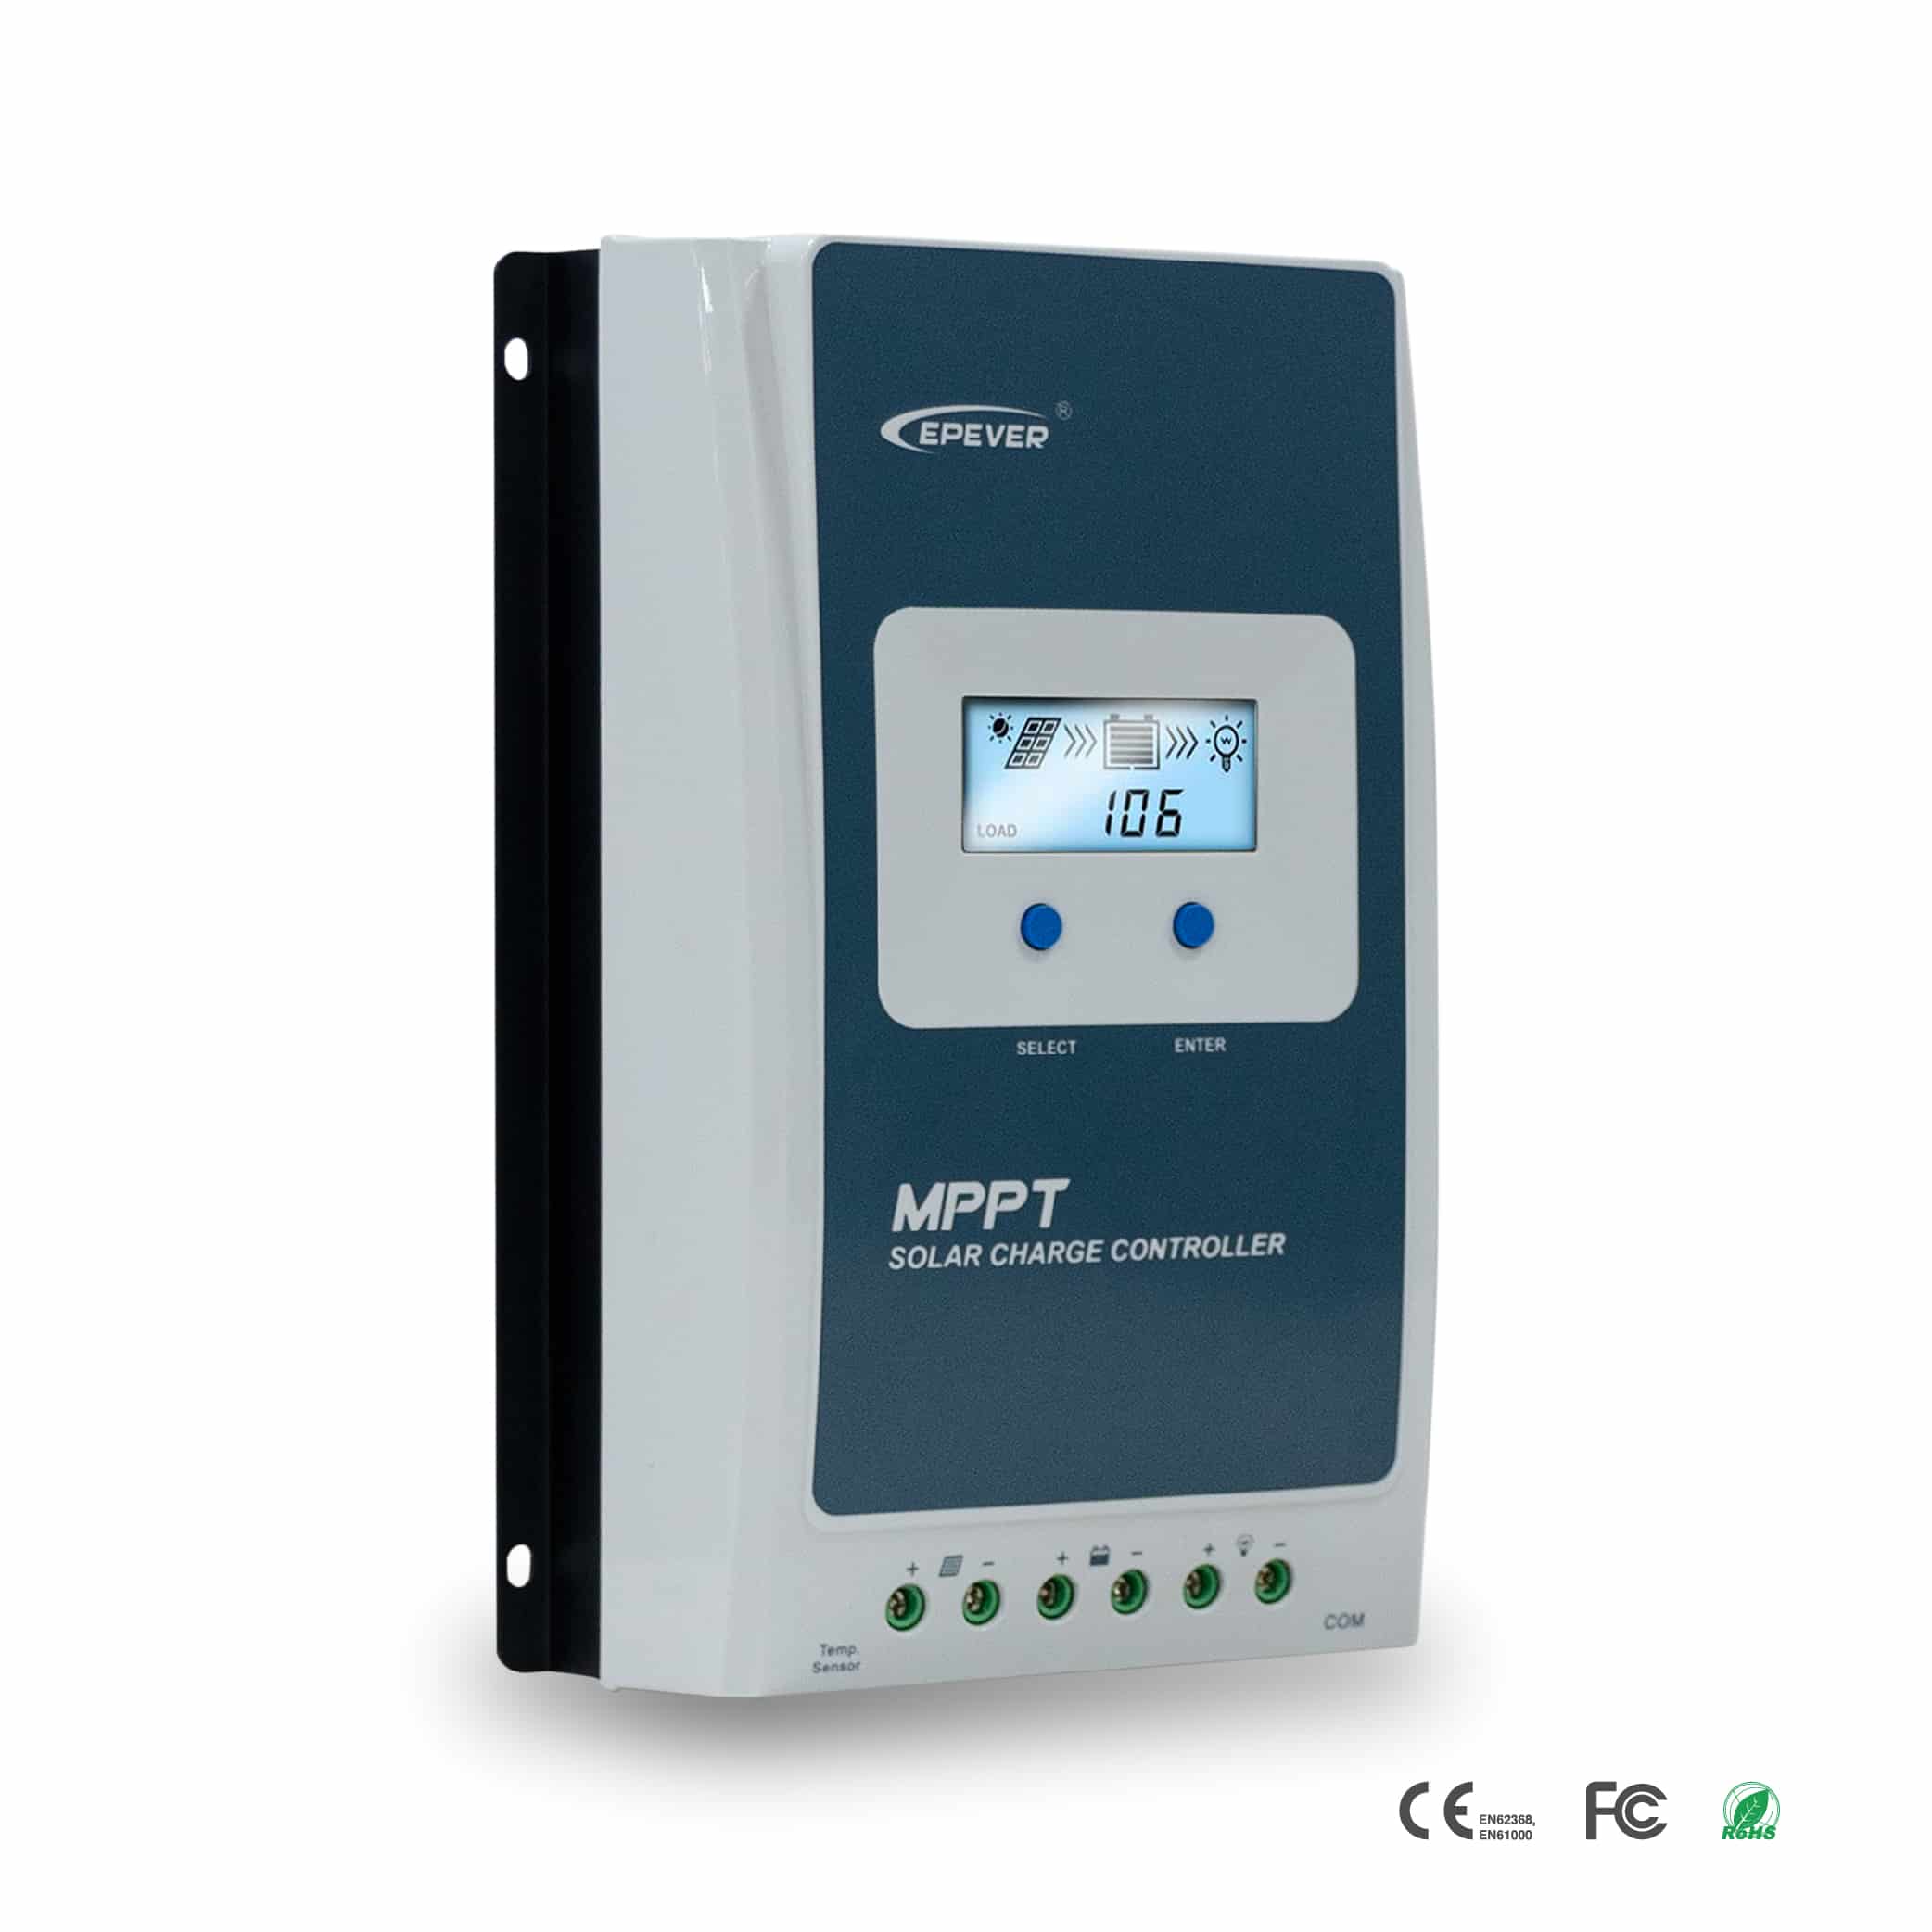 EPEVER MPPT Charge Controller  -  Tracer1206AN